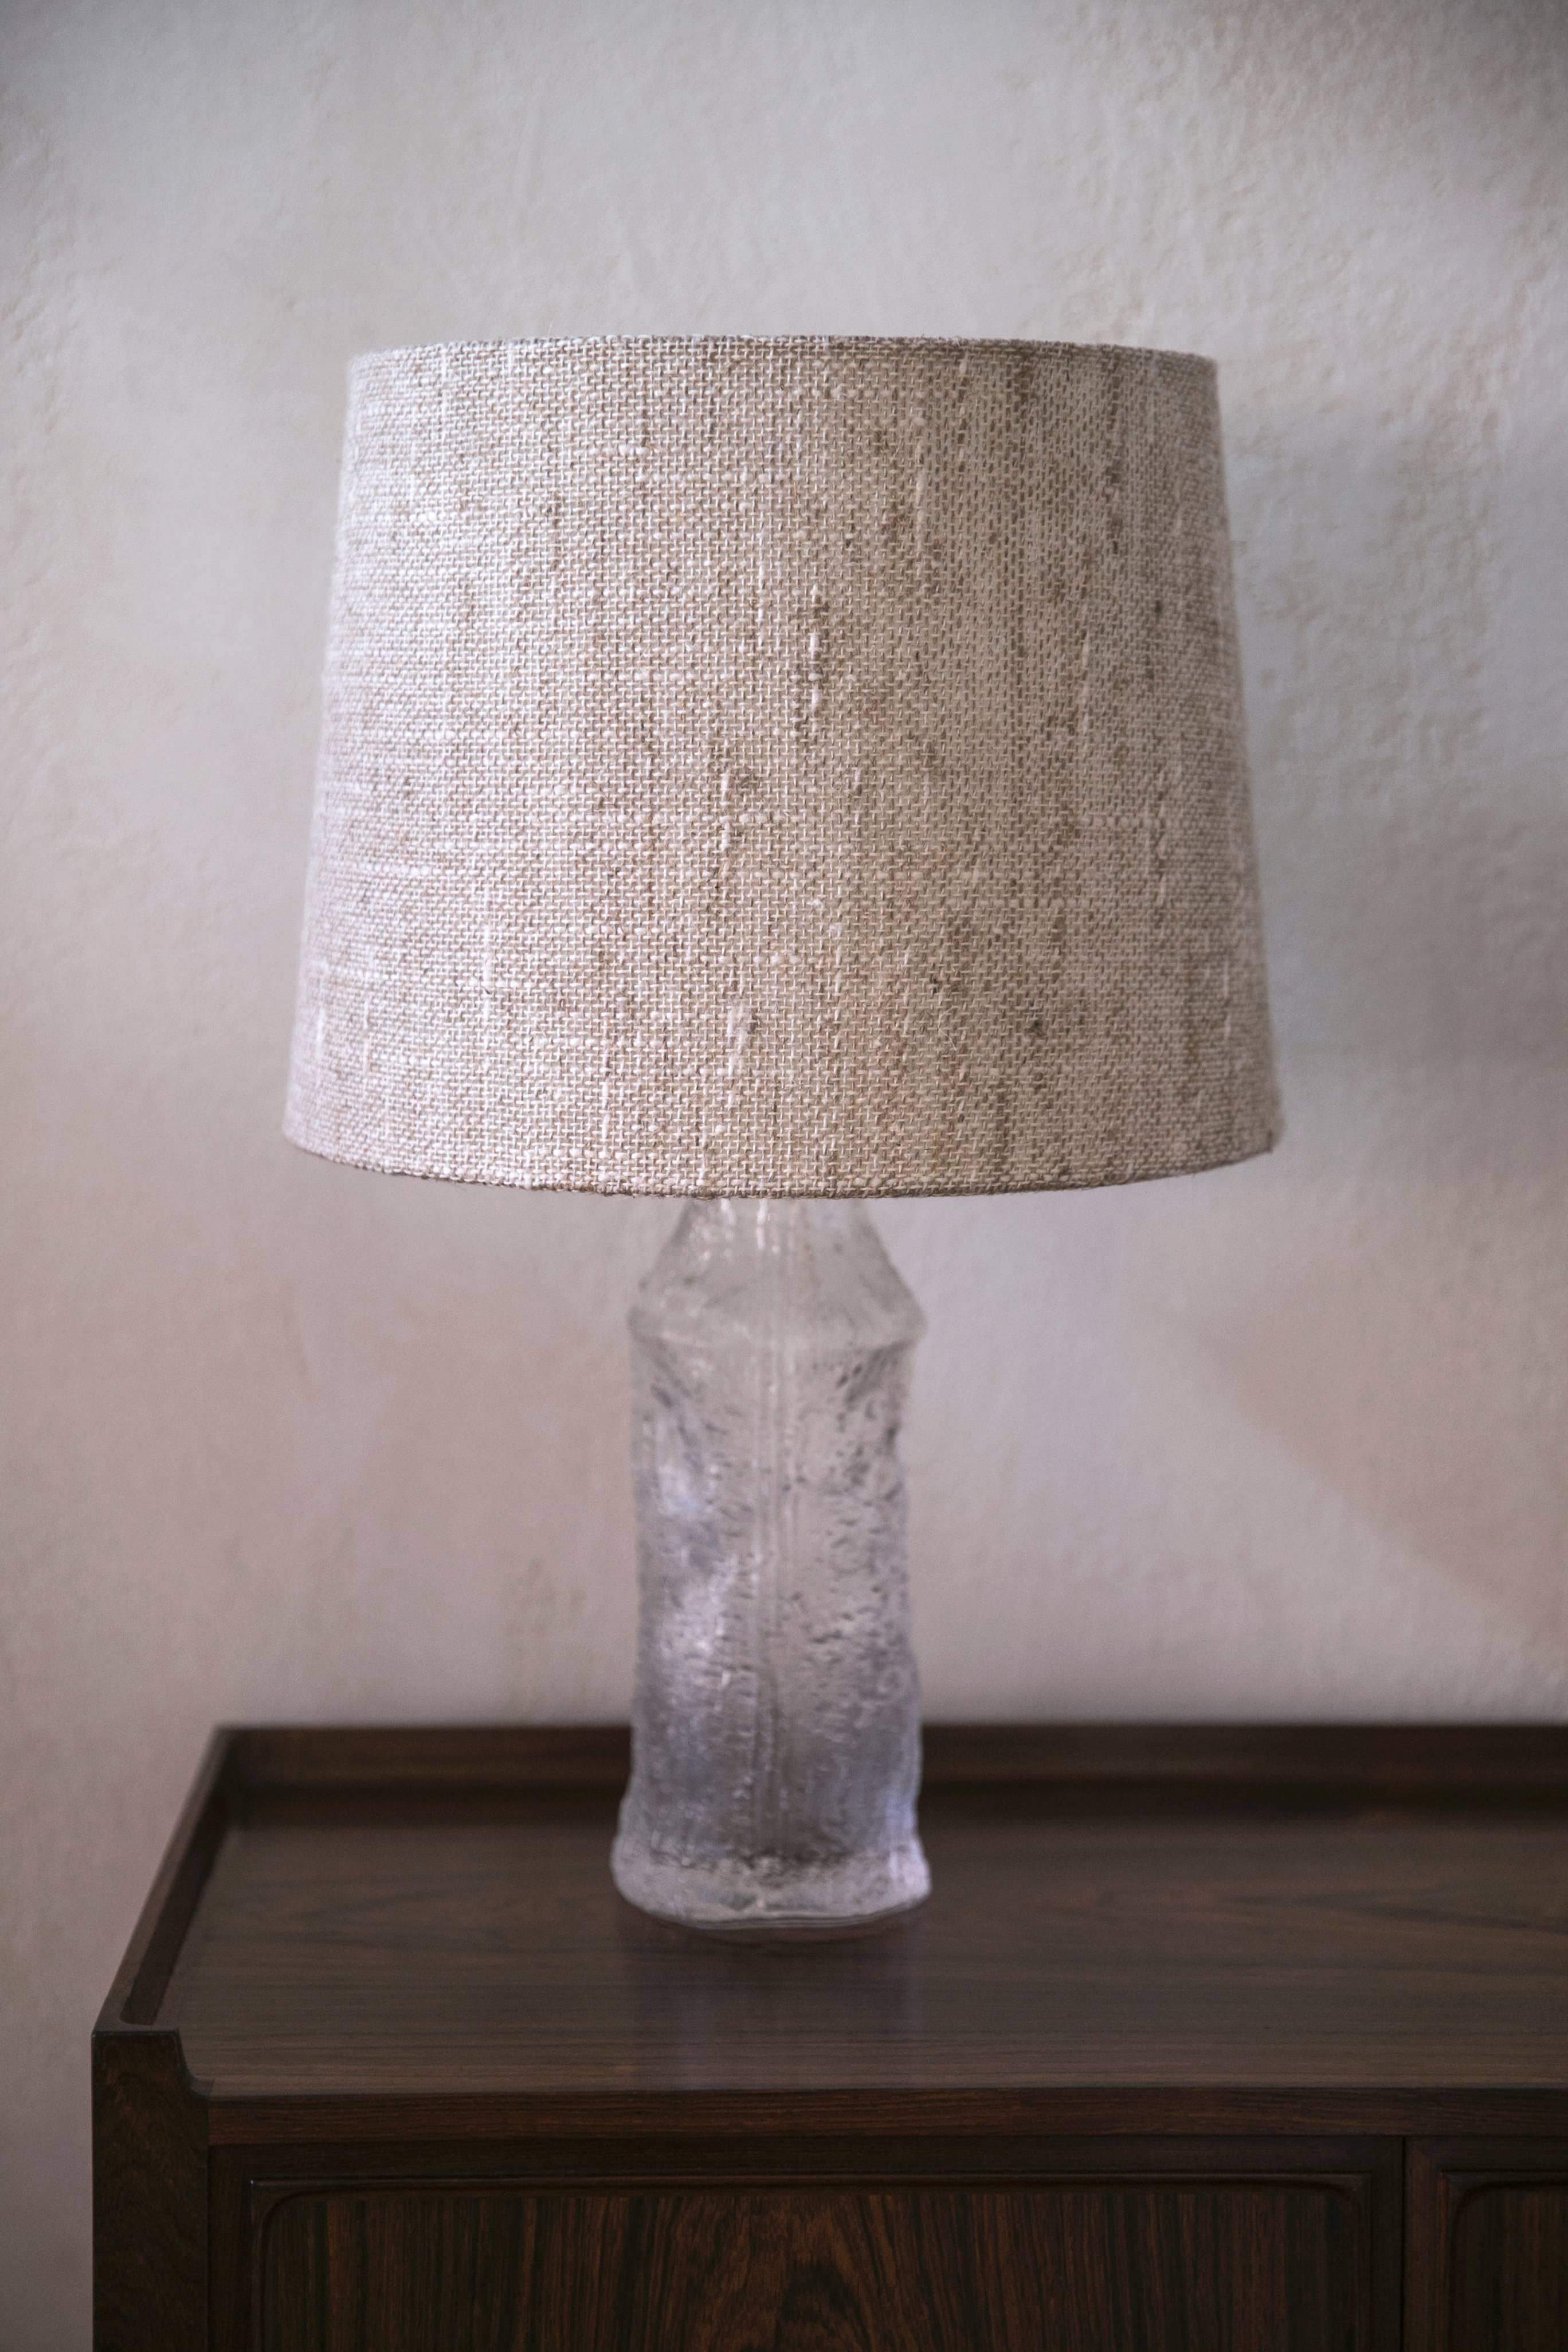 These molded glass lamps in tree trunk form retain their original period linen shades. Made circa 1964 for Iittala, Finland by Luxus of Sweden.

Overall height 20 inches.
Glass base height 10 5/8 inches.
Glass base diameter 4 1/8 inches.
Shade